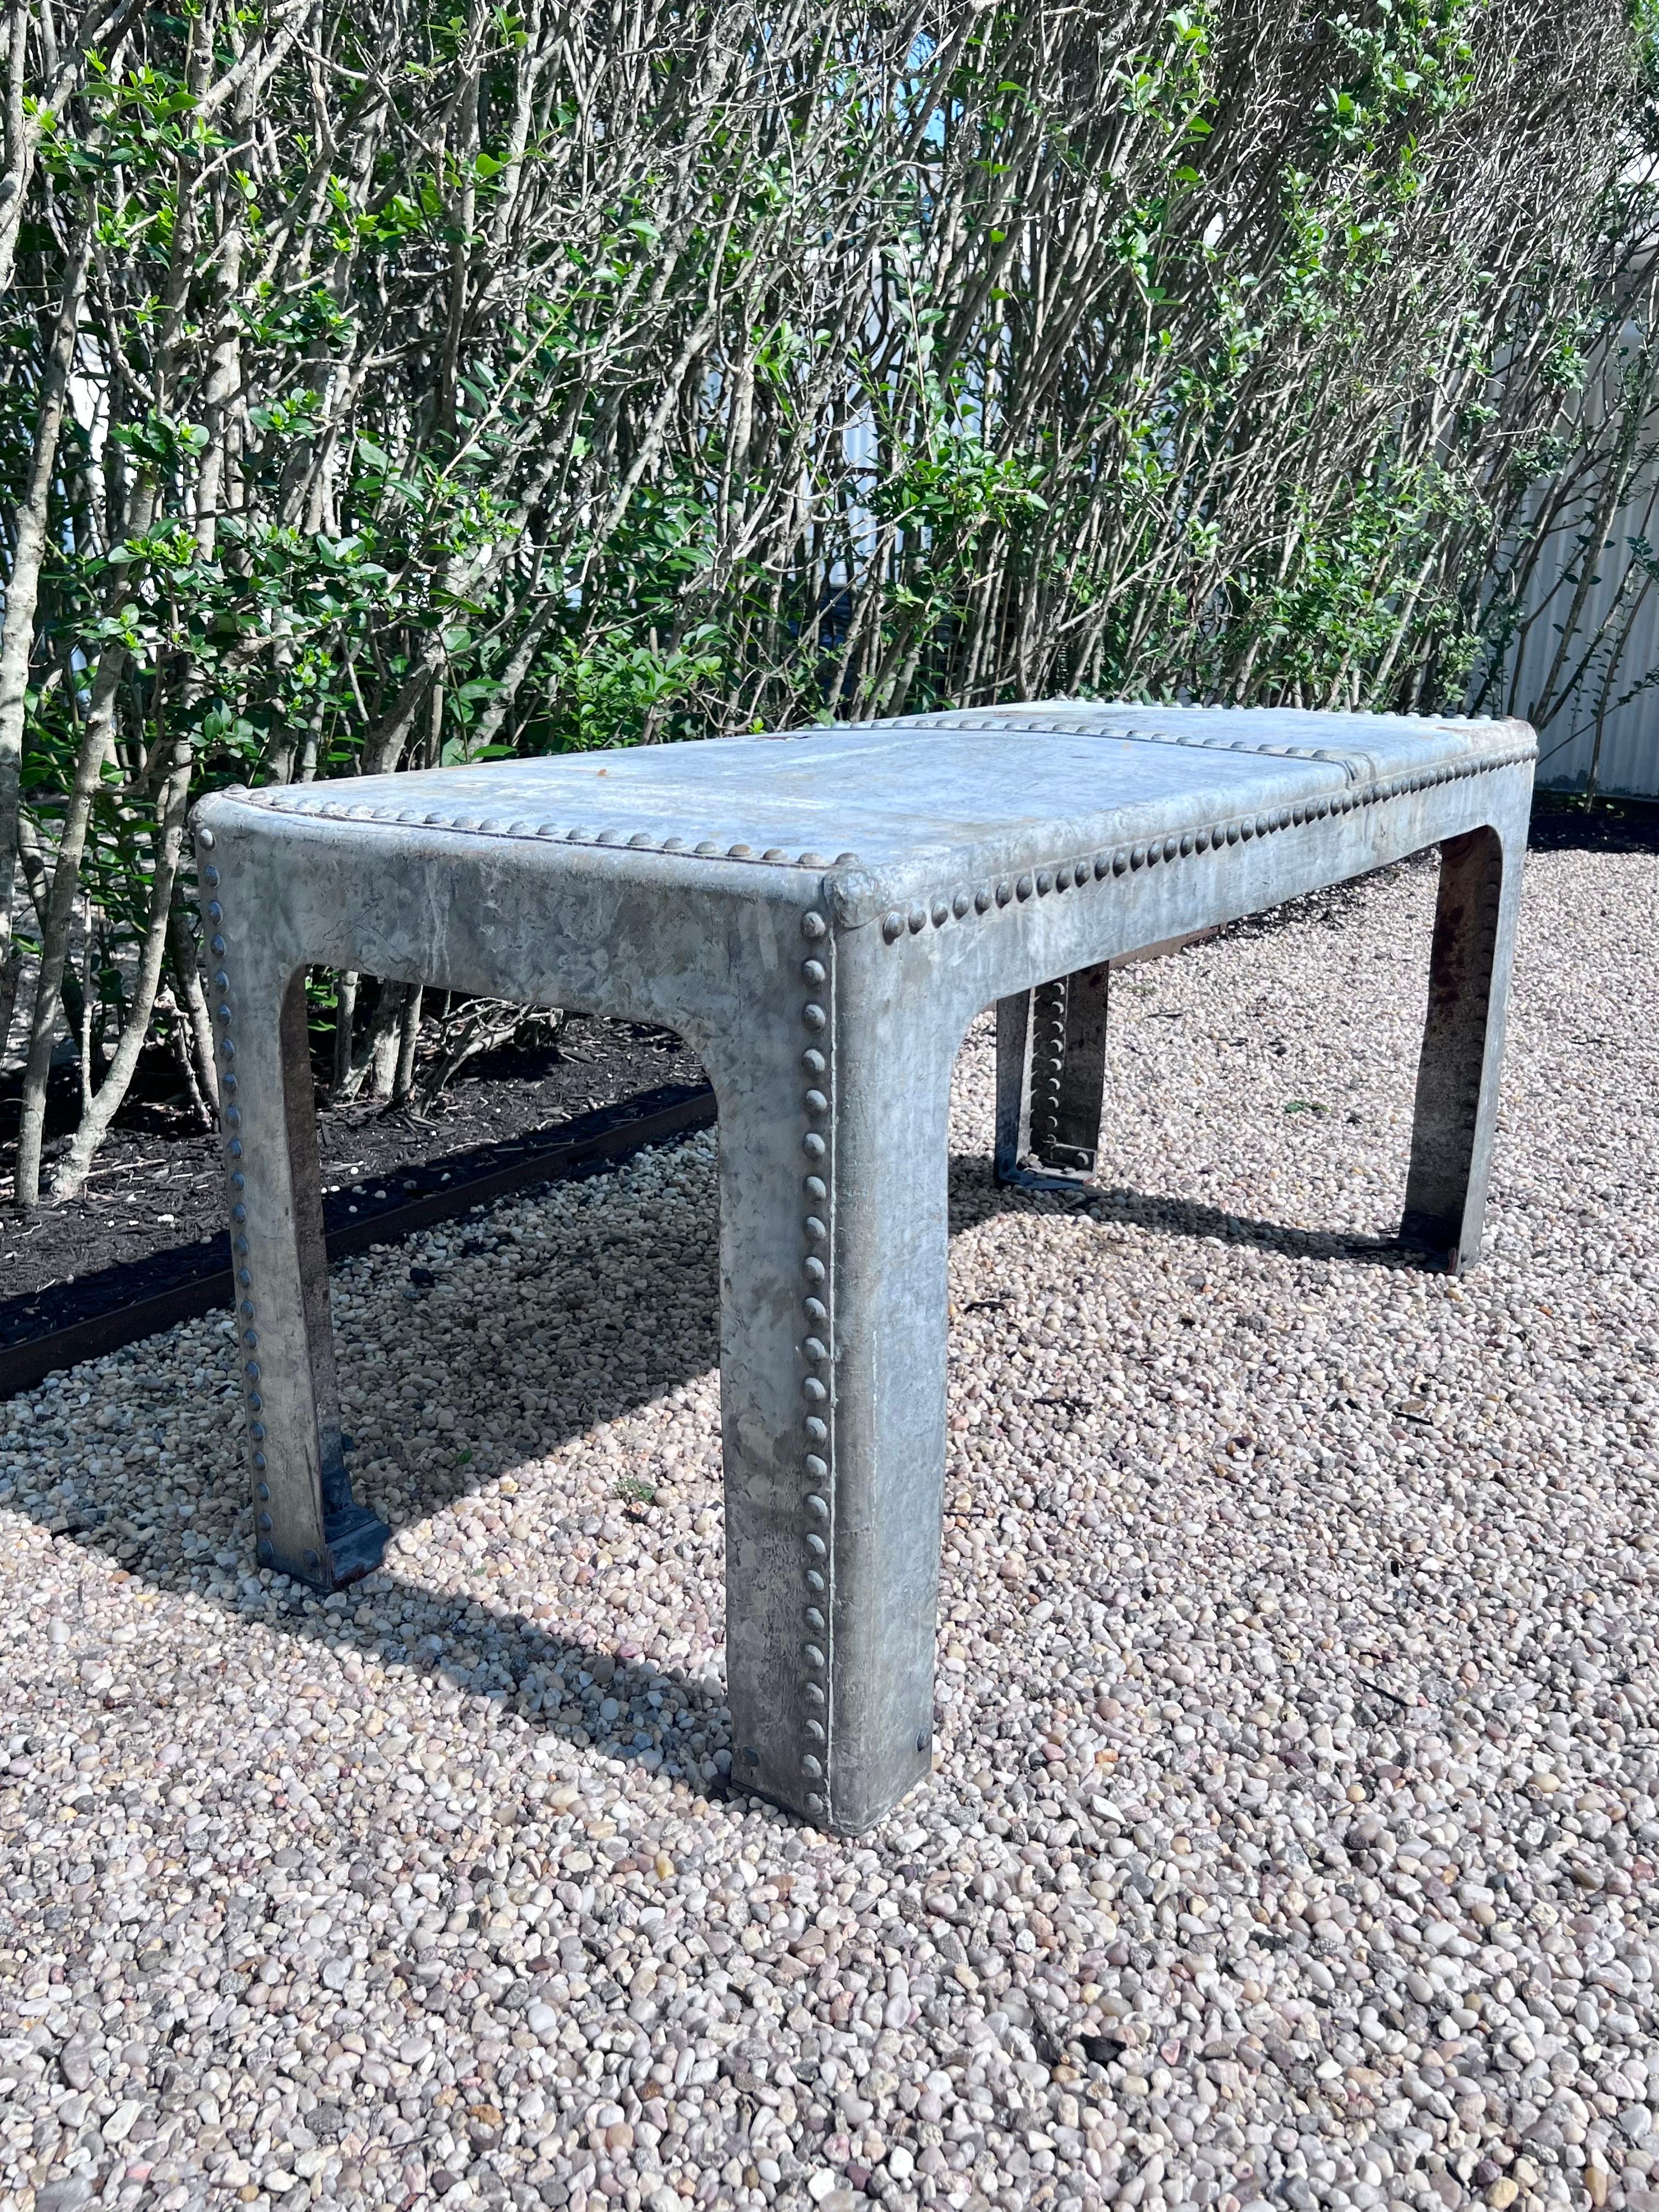 Wonderful industrial riveted metal table in solid galvanized steel/zinc. Table with metal rivets welded to the top and sides. Was most likely used in a factory or barn at some point. Incredibly hard-wearing and sturdy, this table would look